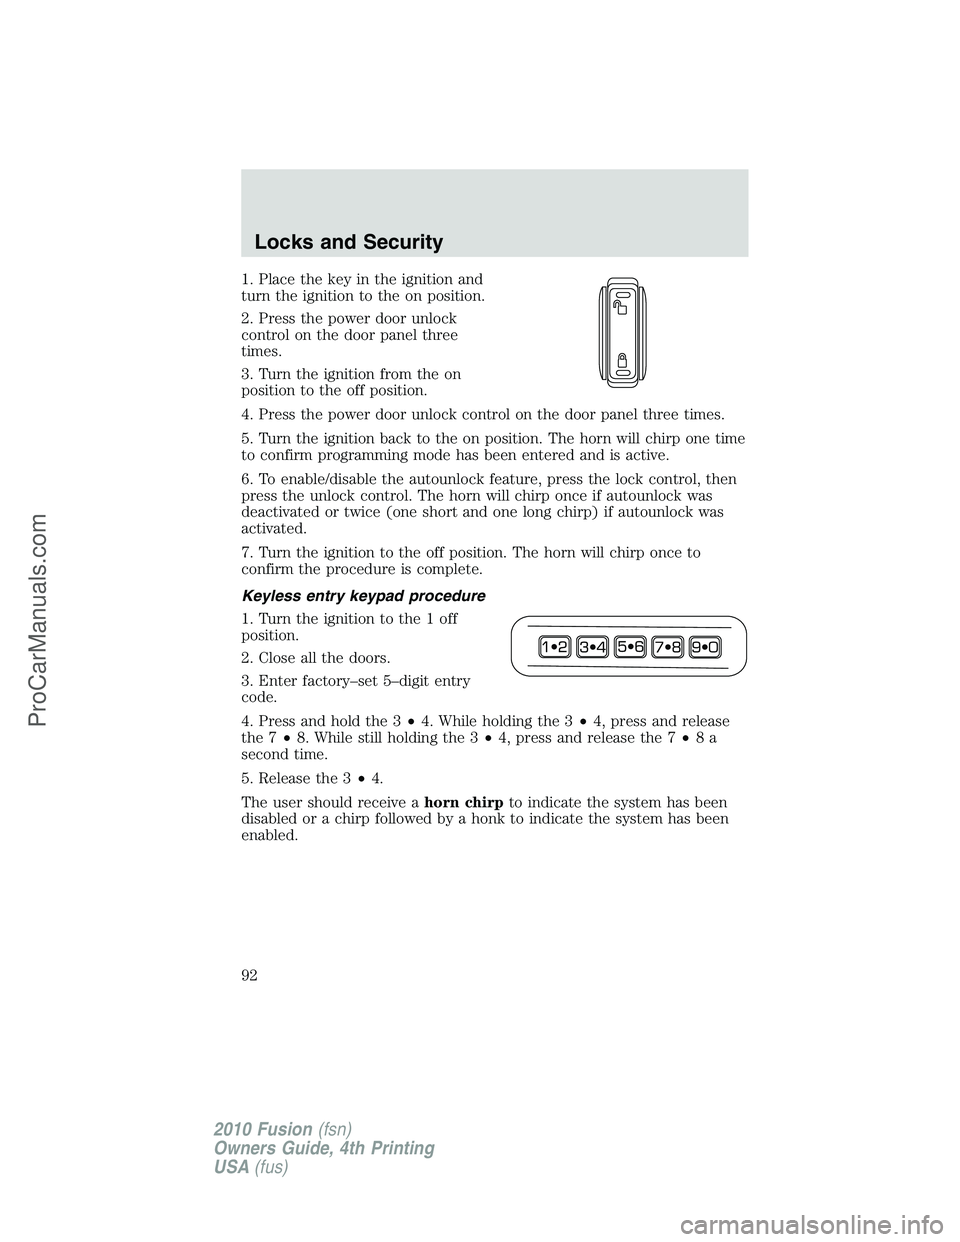 FORD FUSION 2010  Owners Manual 1. Place the key in the ignition and
turn the ignition to the on position.
2. Press the power door unlock
control on the door panel three
times.
3. Turn the ignition from the on
position to the off po